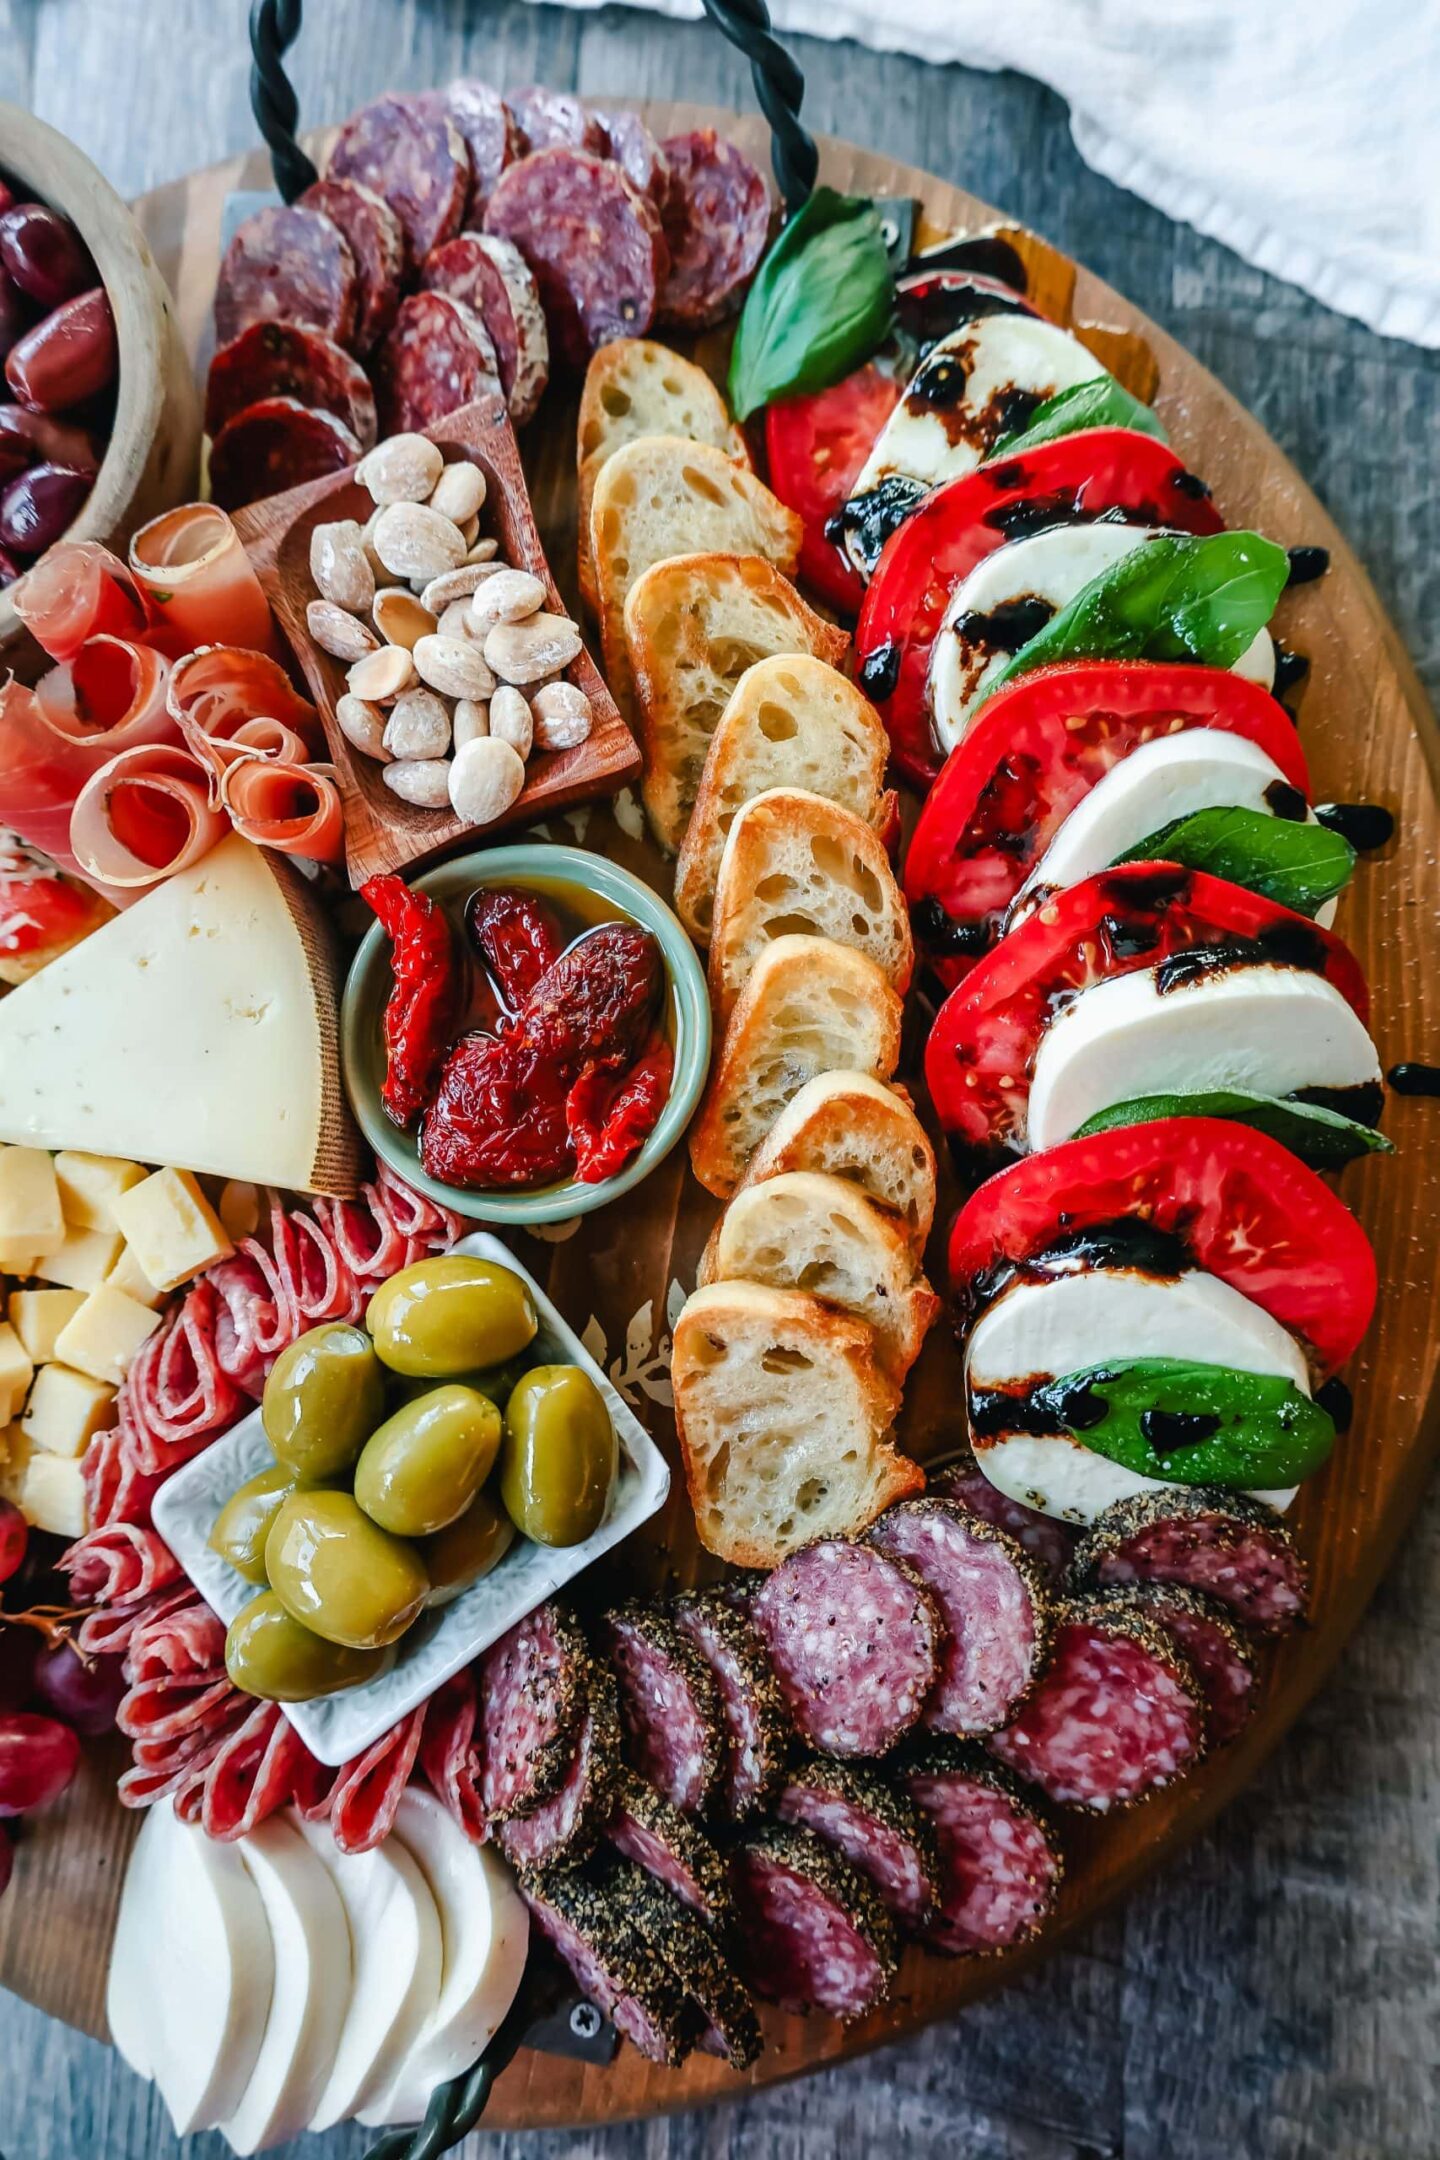 32 Stunning Charcuterie Board Ideas for Every Occasion